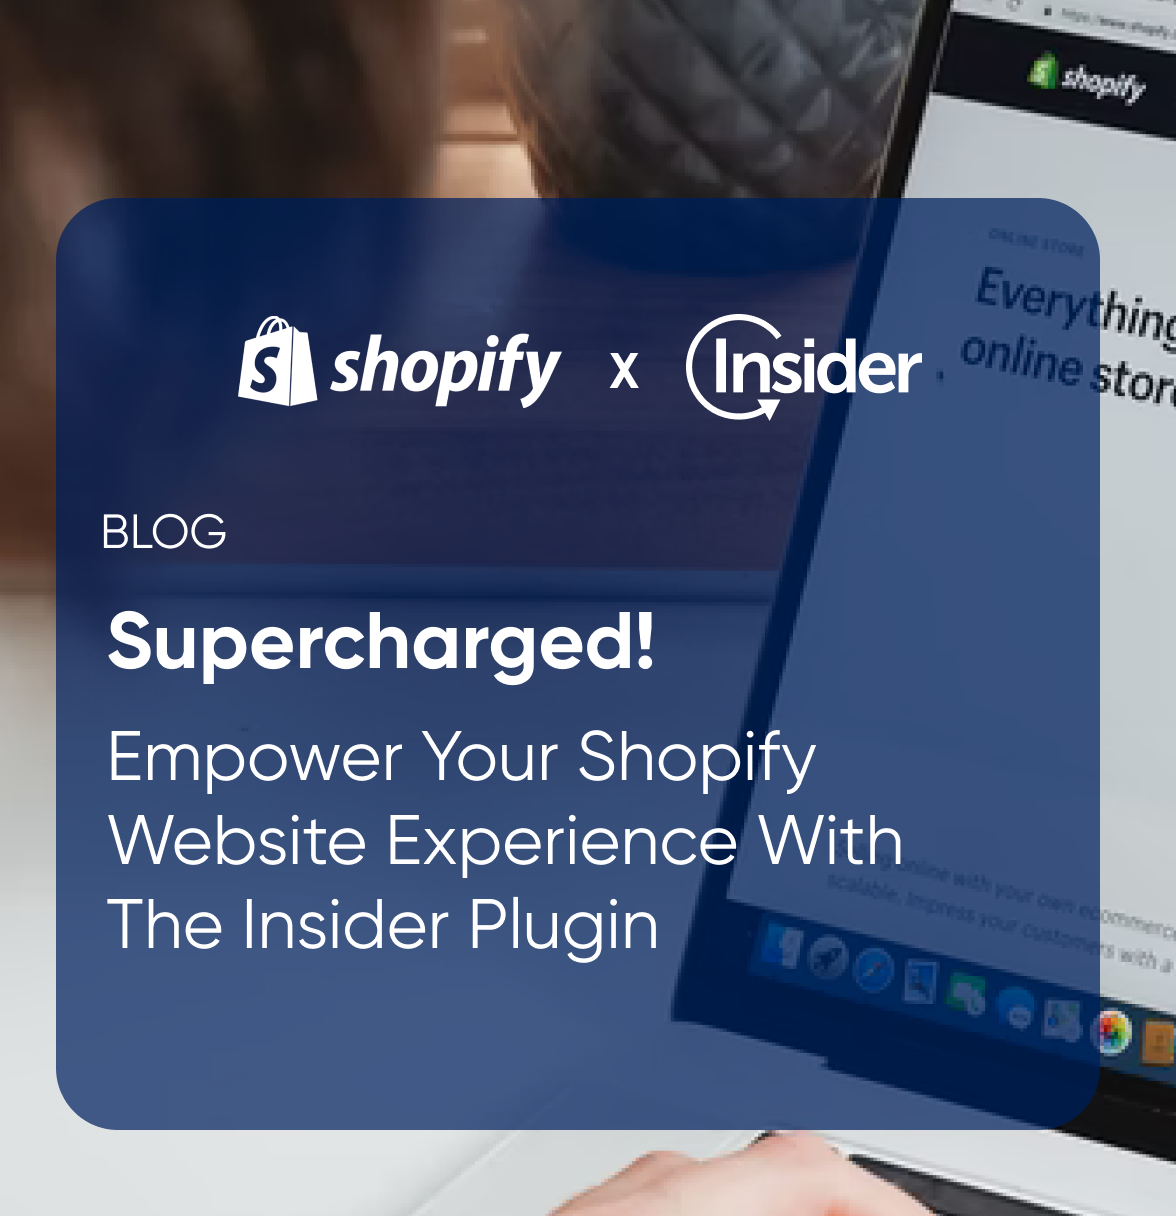 Empower your Shopify Website Experience With The Insider Plugin Featured Image